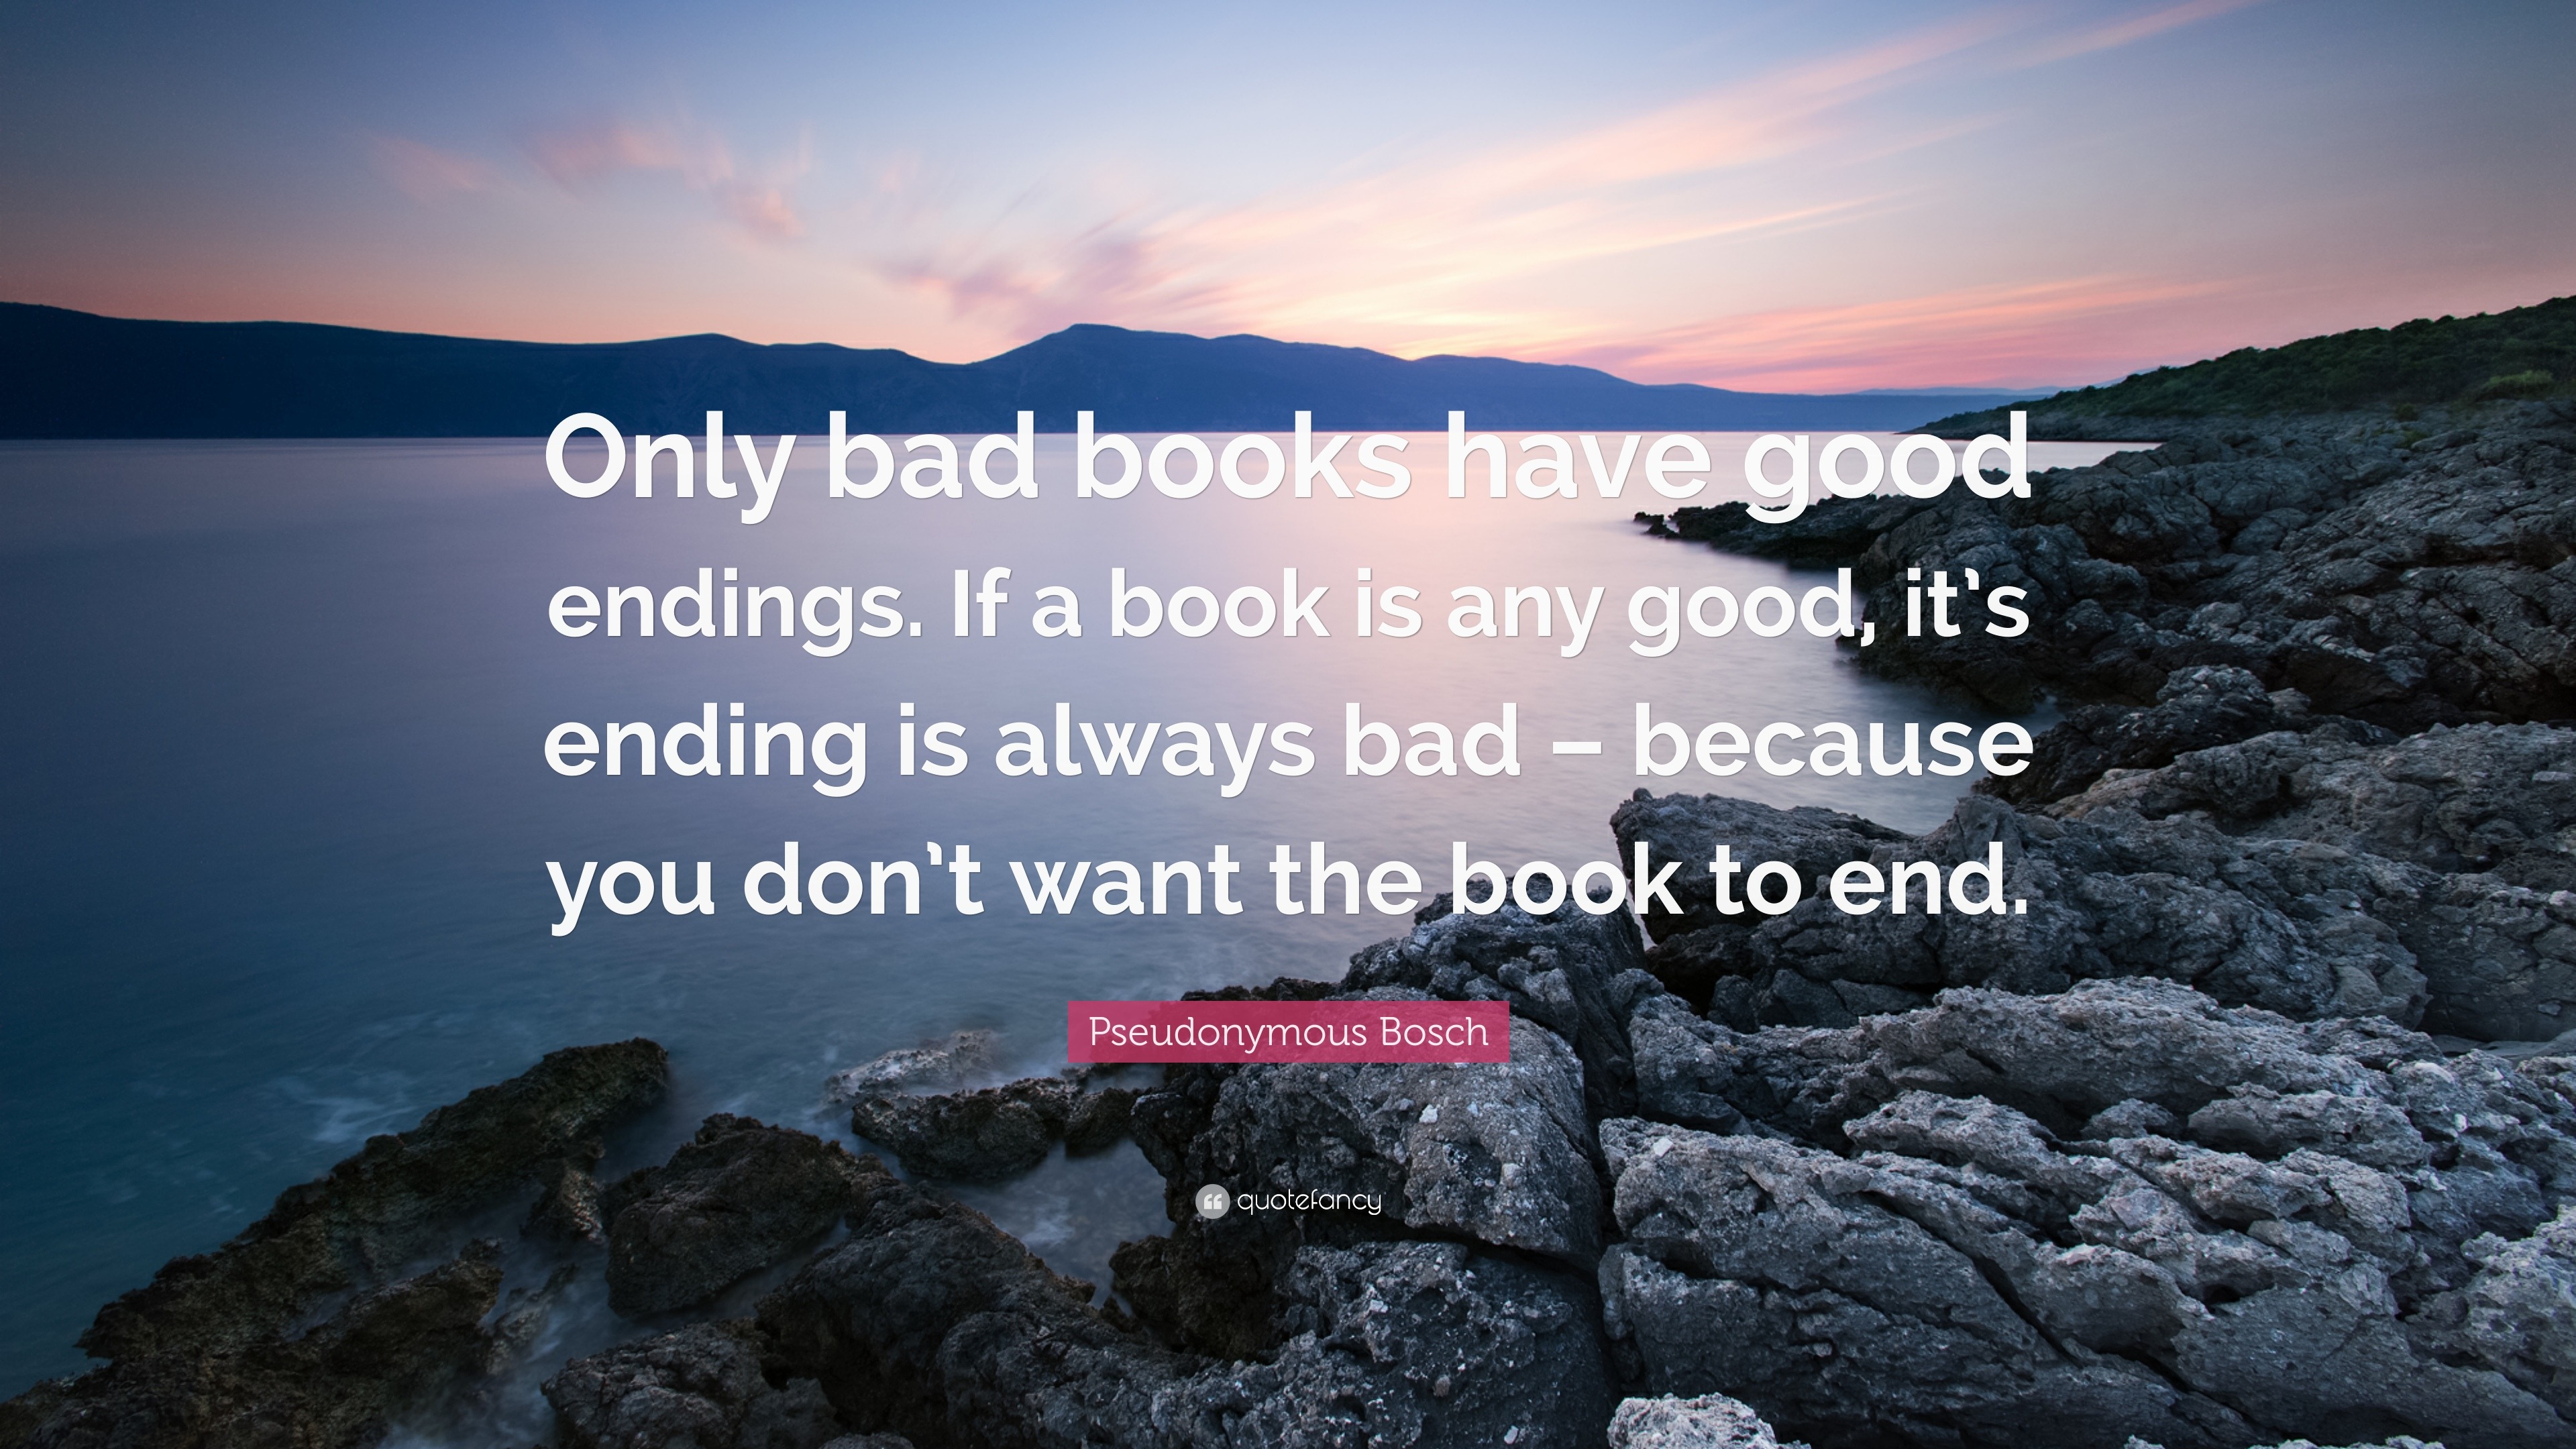 pseudonymous-bosch-quote-only-bad-books-have-good-endings-if-a-book-is-any-good-it-s-ending